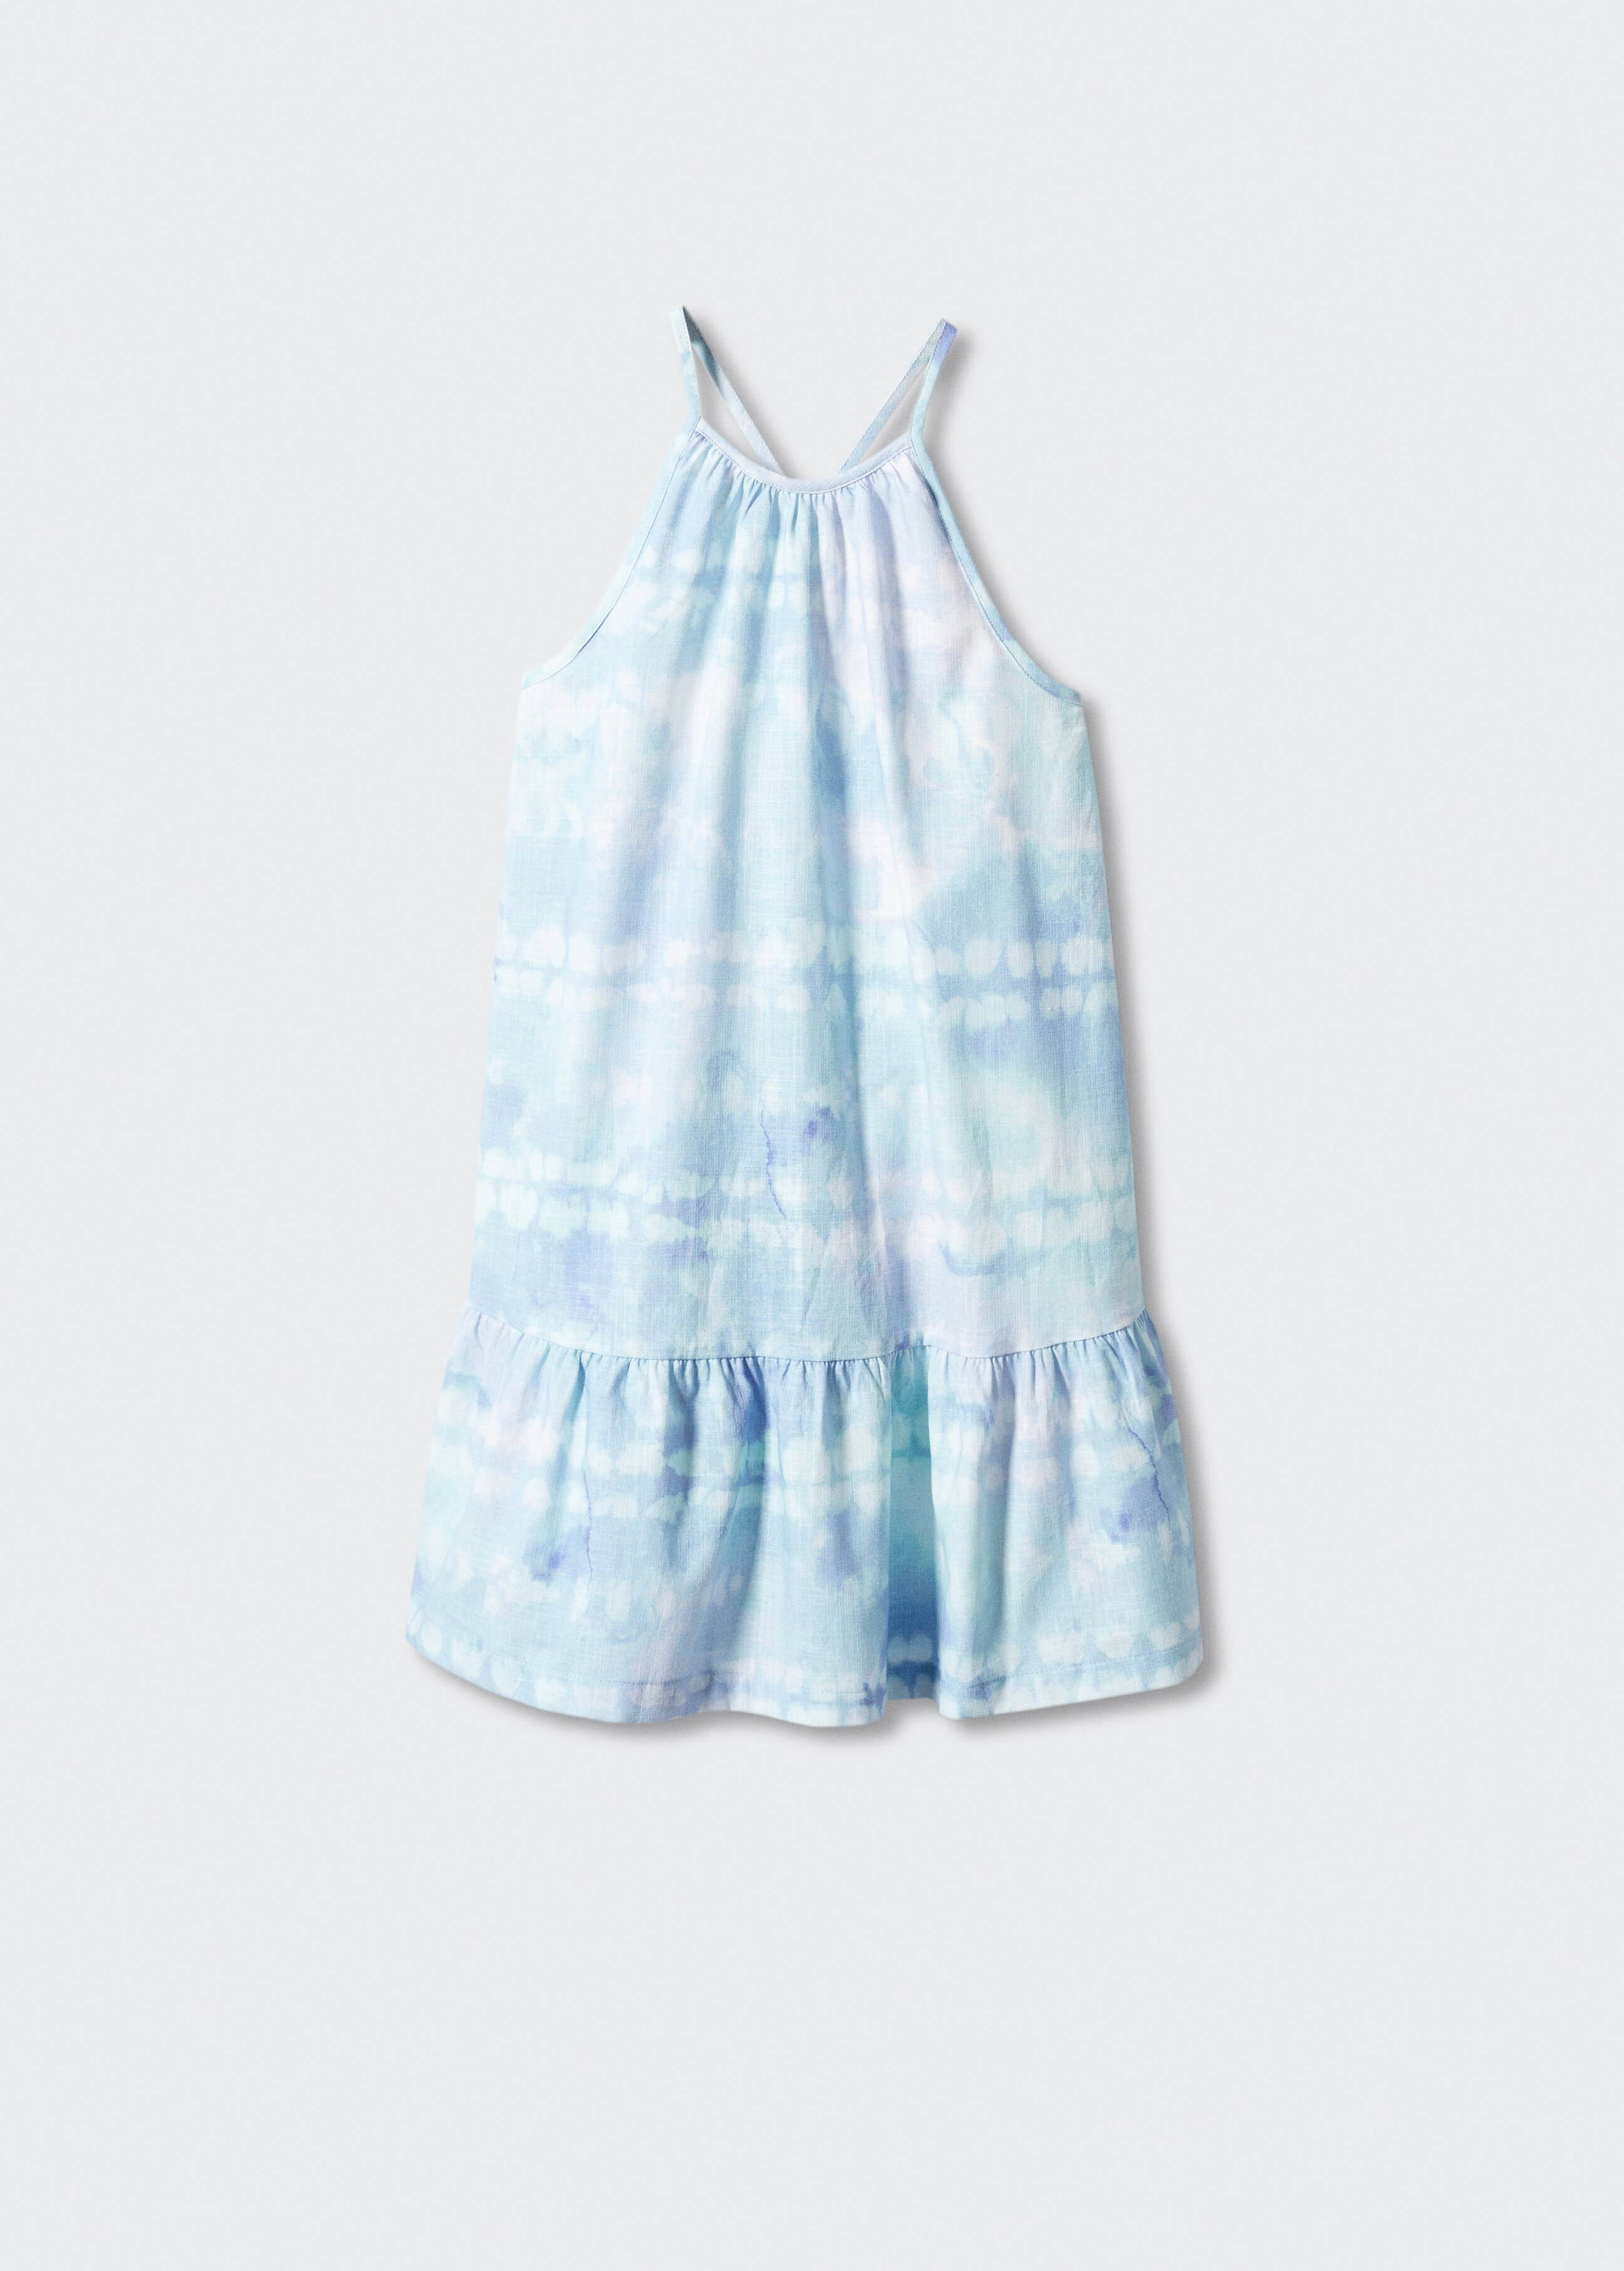 Tie-dye cotton dress - Article without model